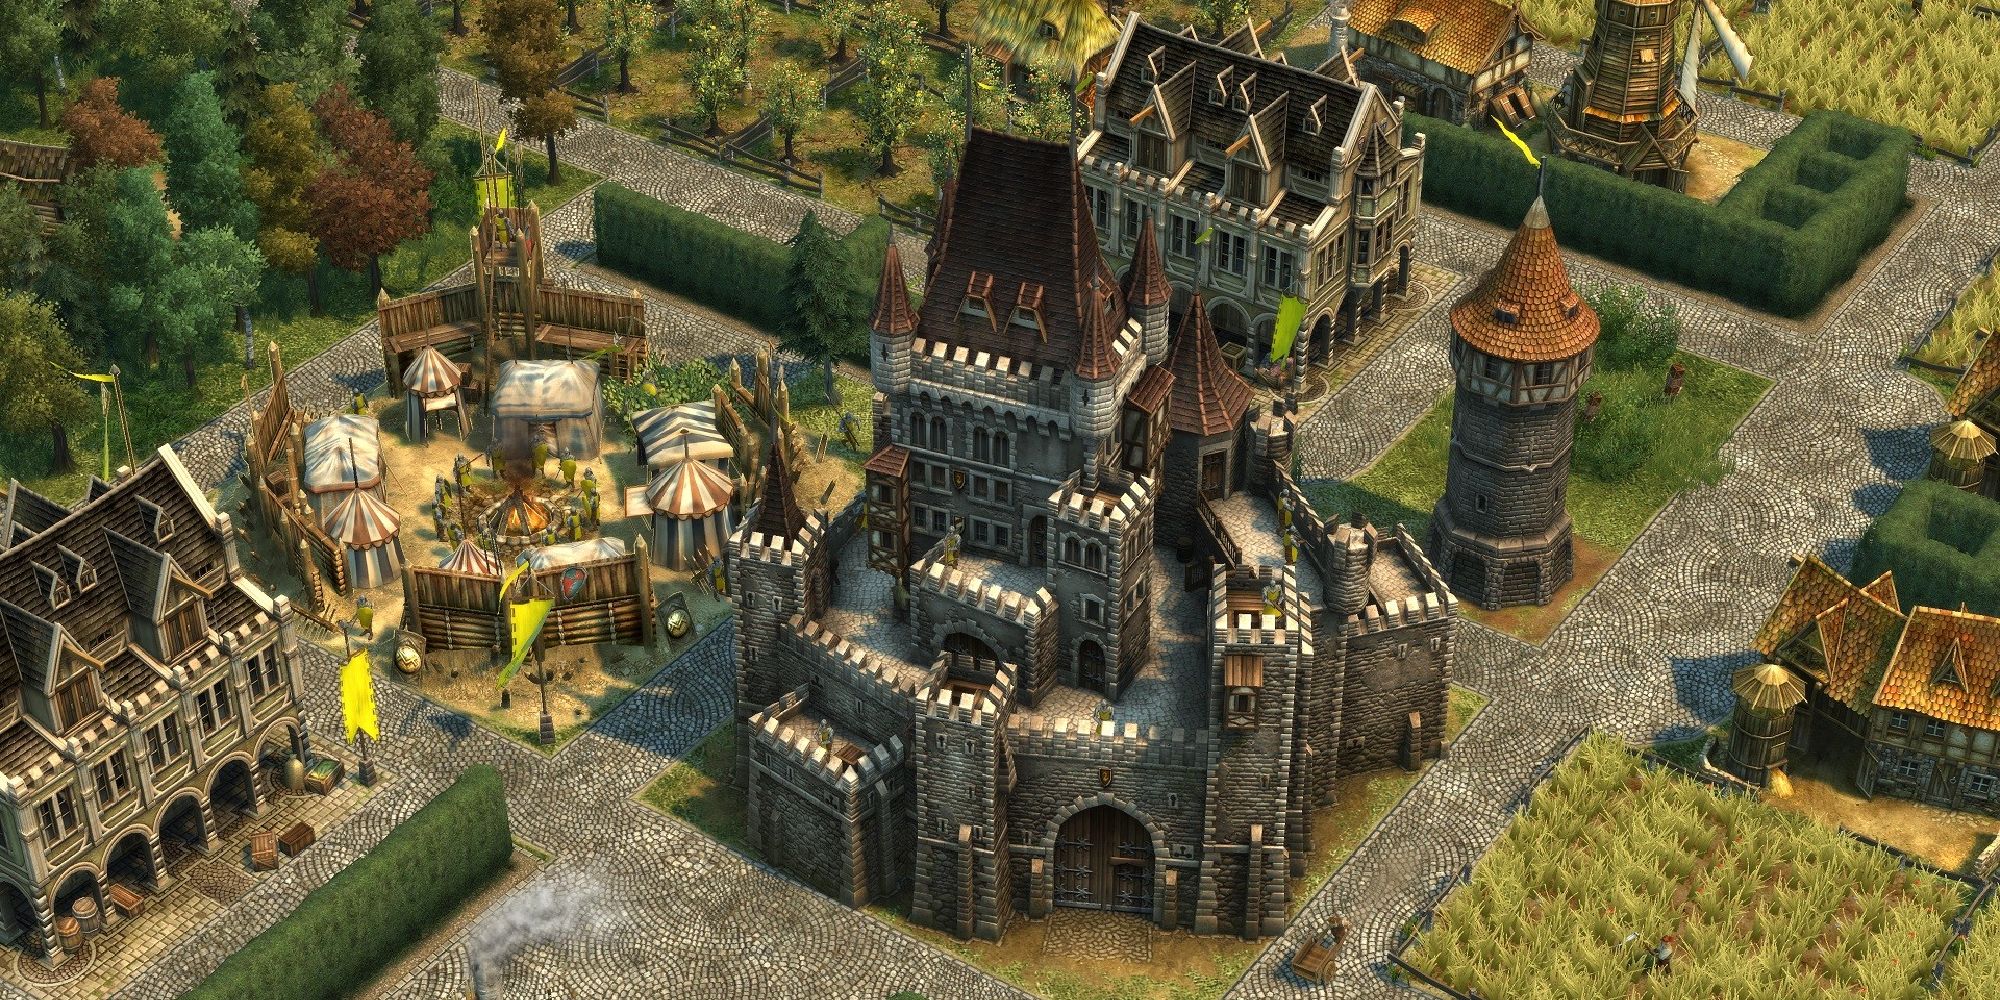 Anno 1404 game campaign image from steam